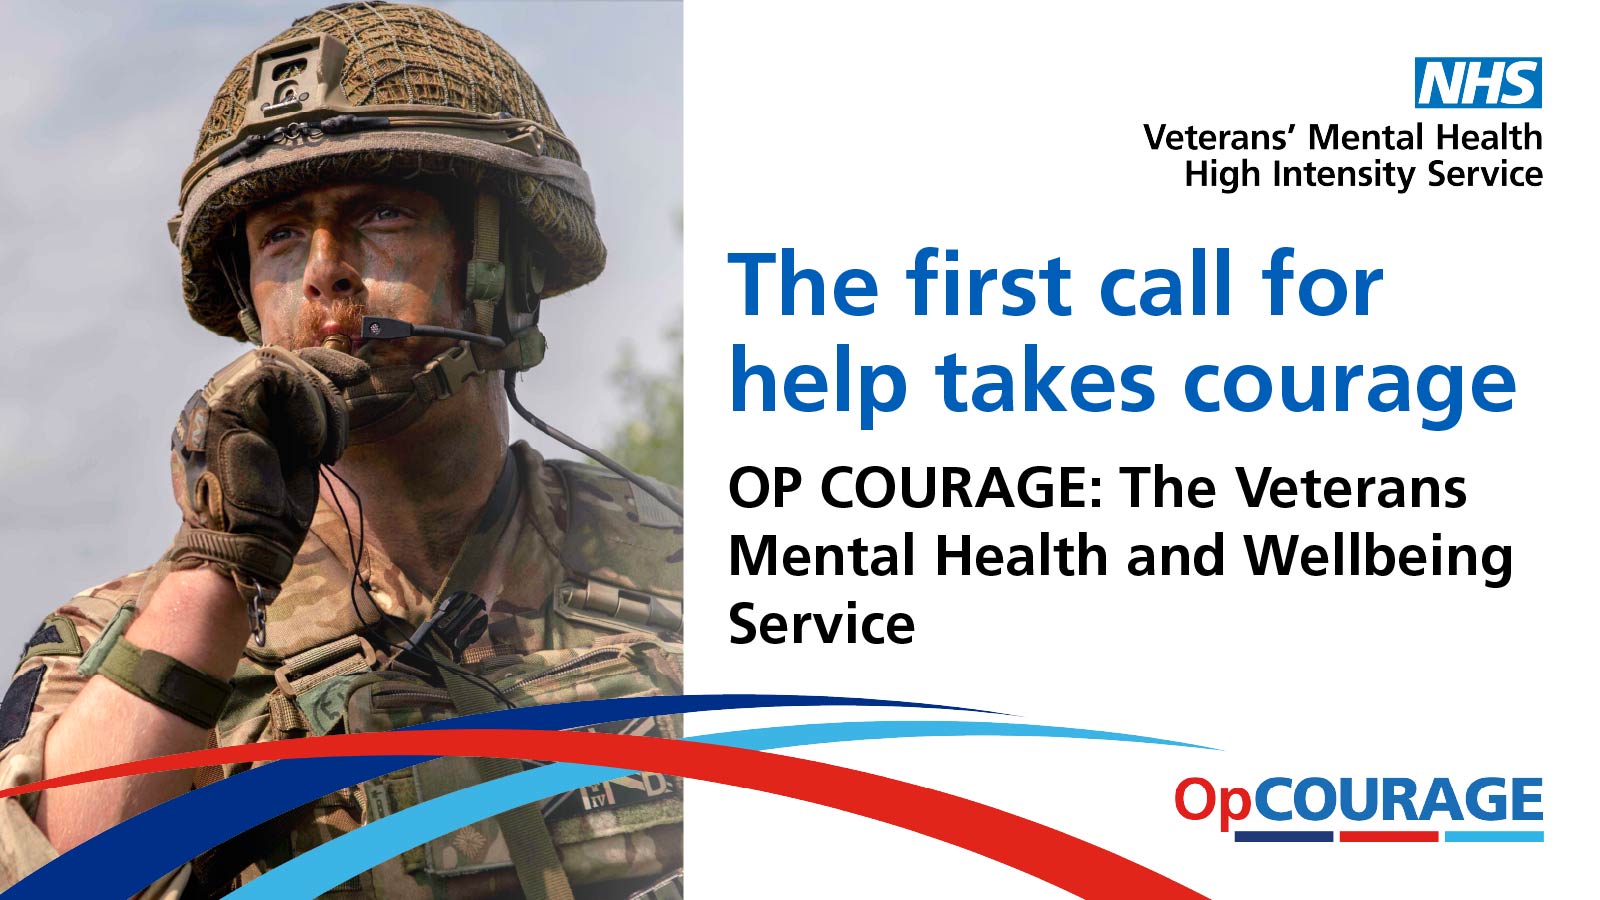 Dedicated mental health crisis support for veterans